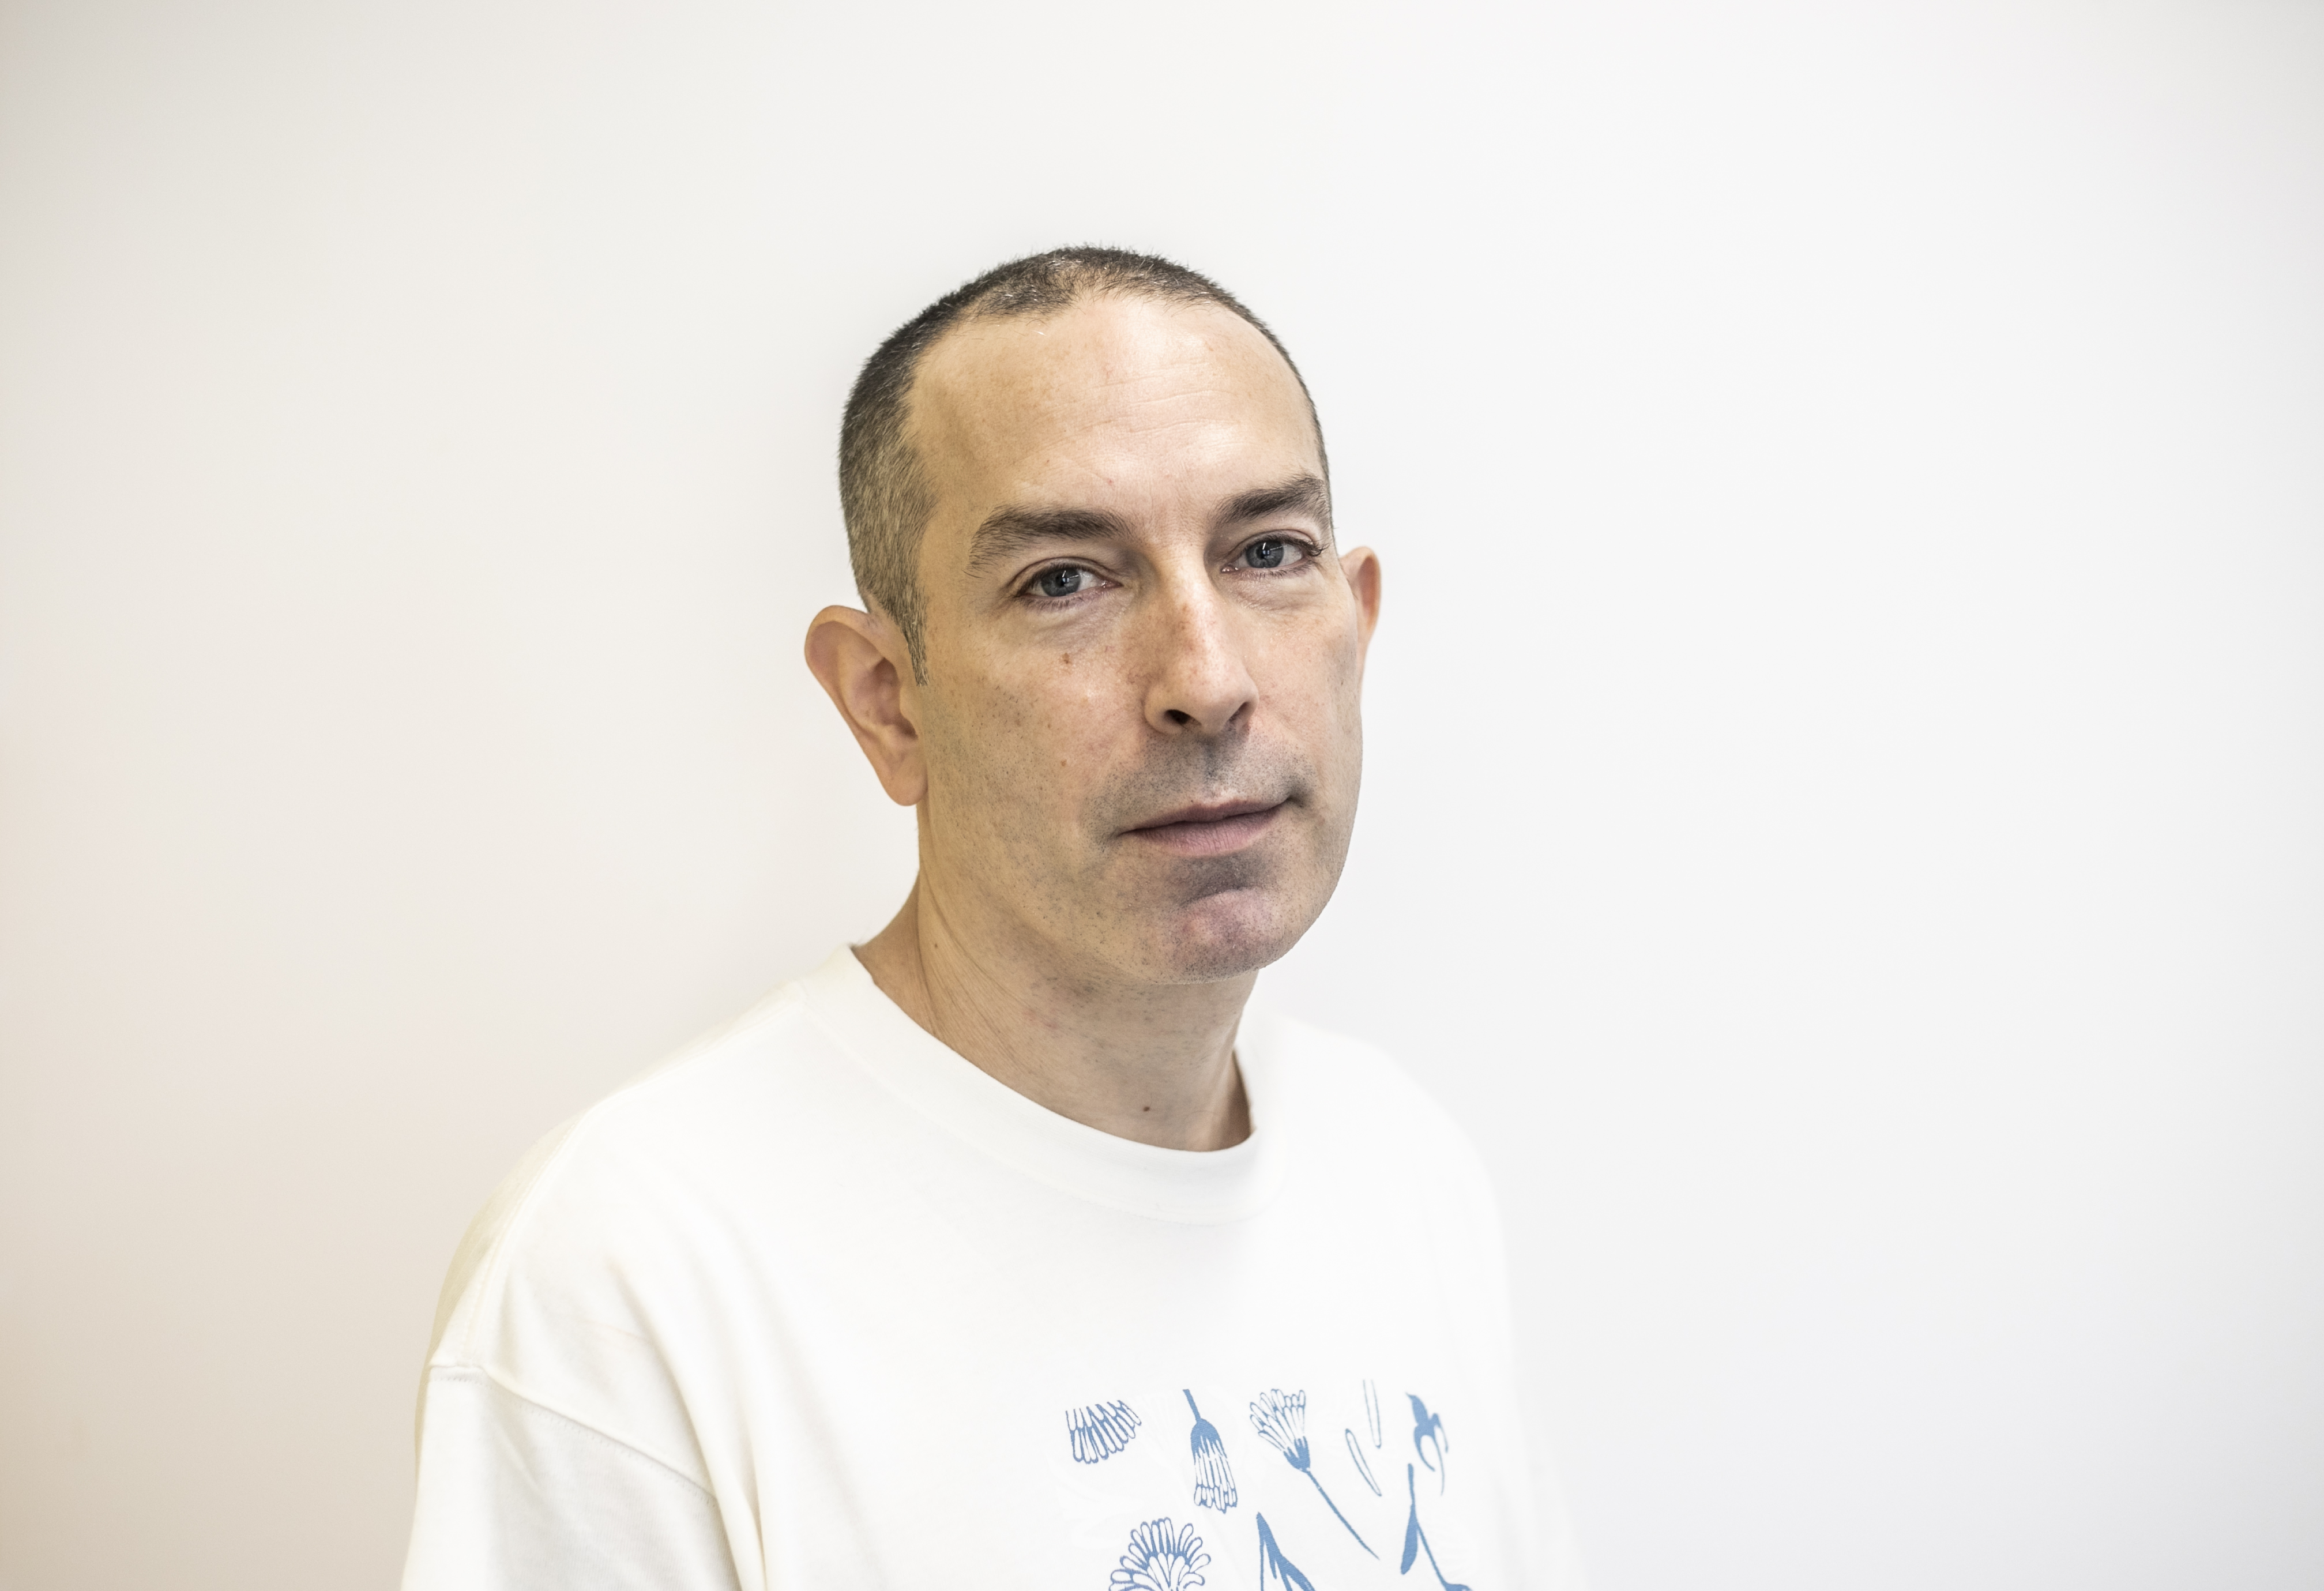 Headshot of Barny Darnell. White male with shaved head and white t-shirt with white background